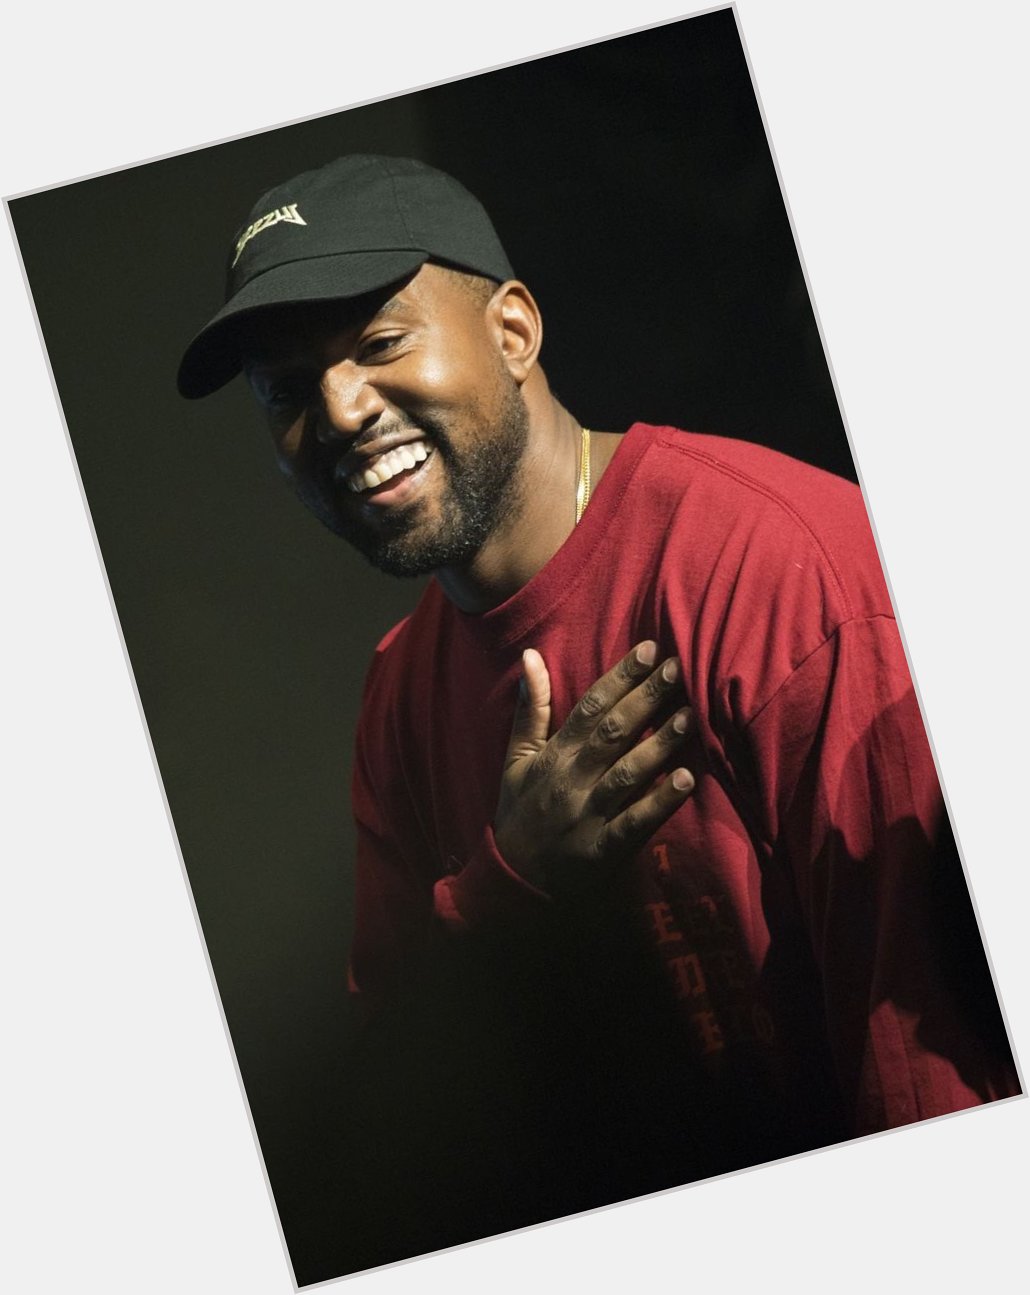 Happy 41st birthday to the greatest artist of our generation and the man who inspires me the most, Kanye West. 